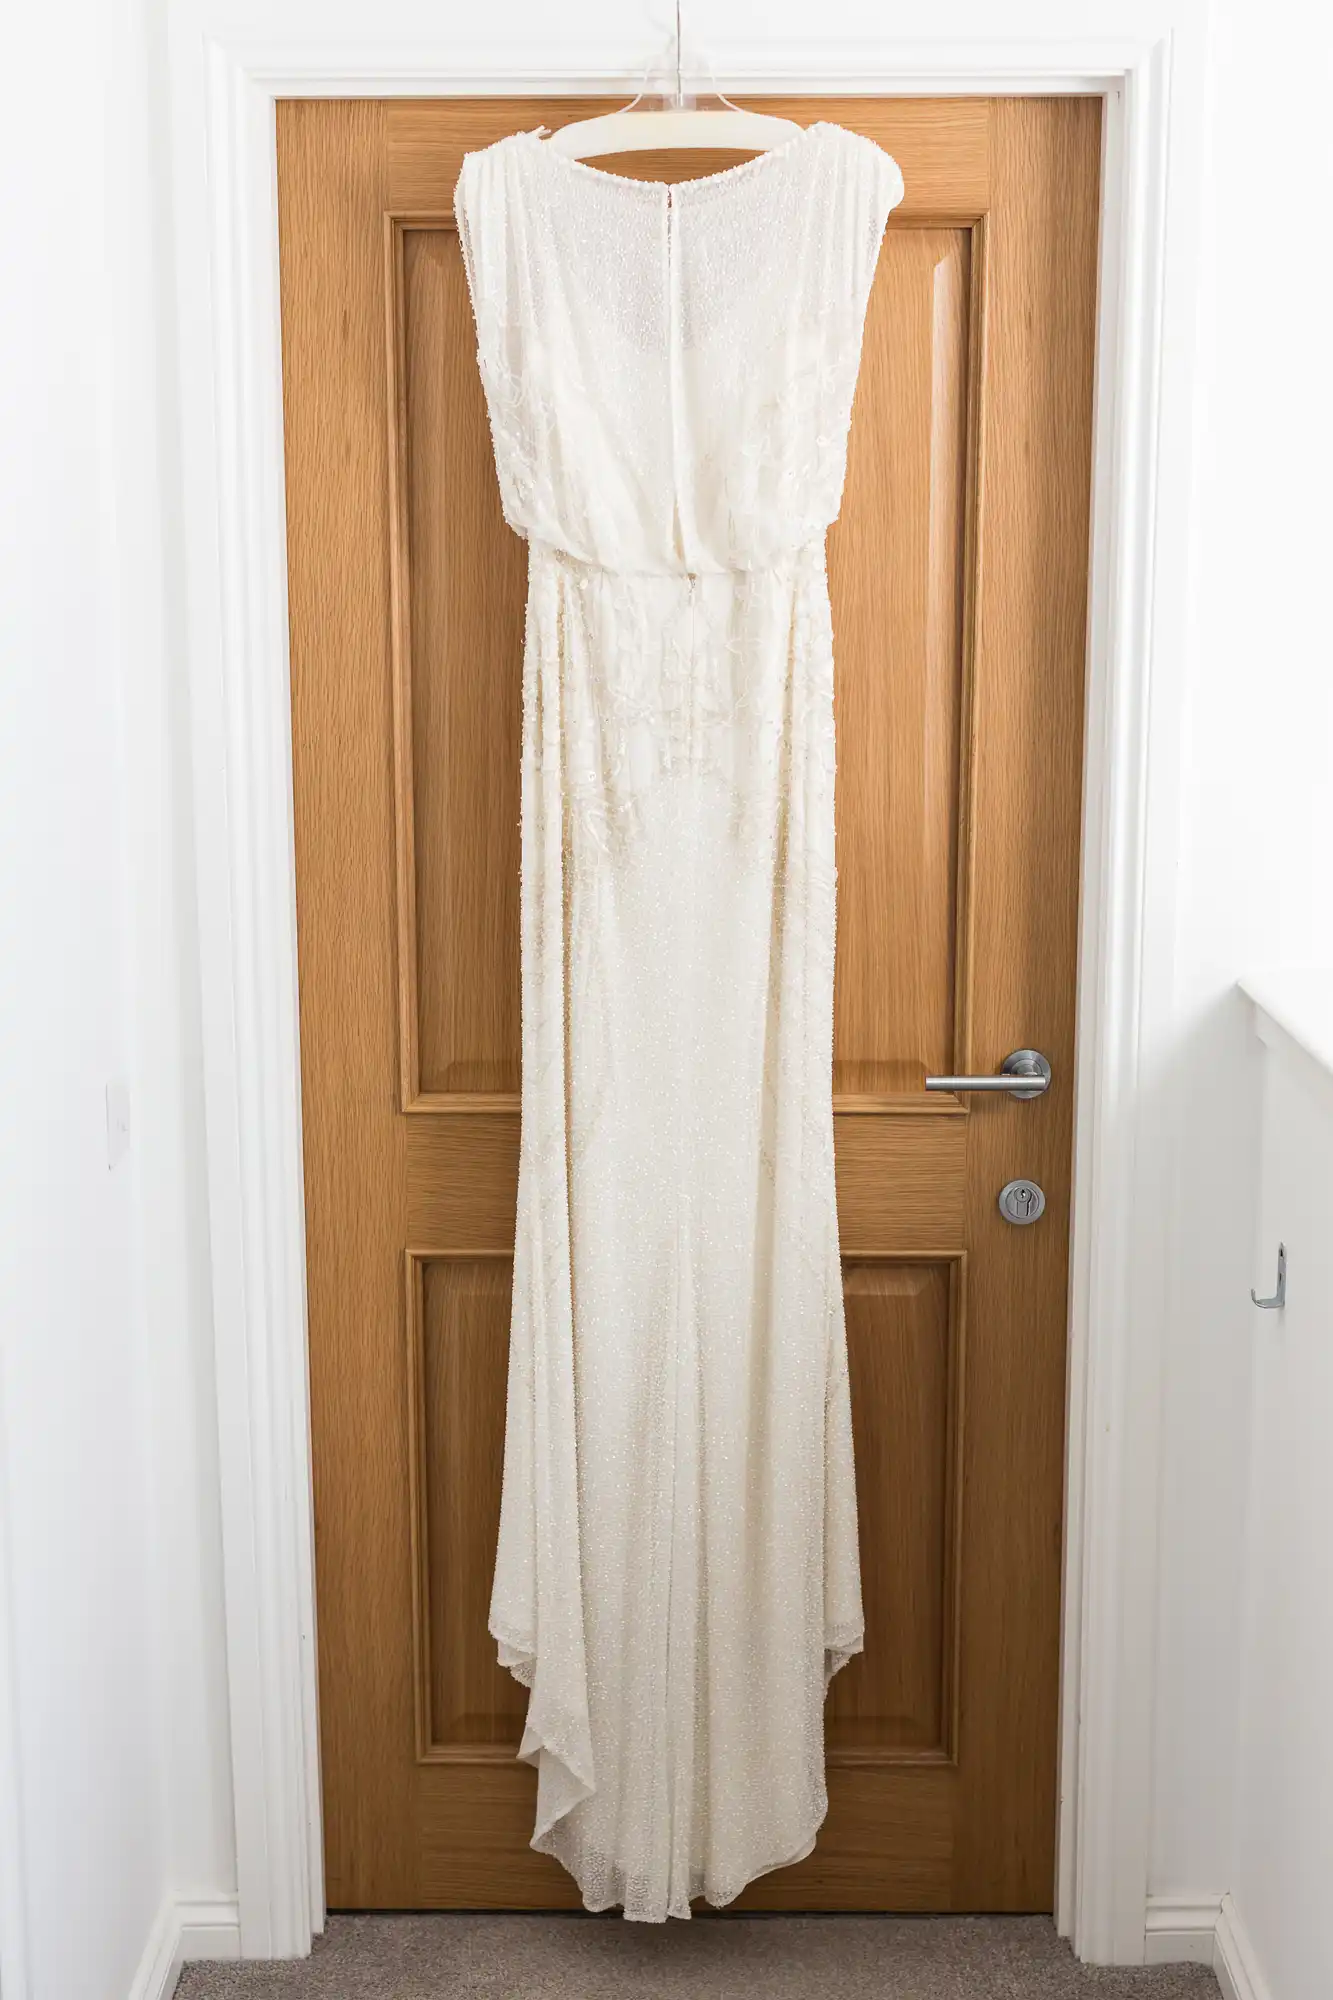 A long, white, beaded wedding dress hanging on a wooden door.